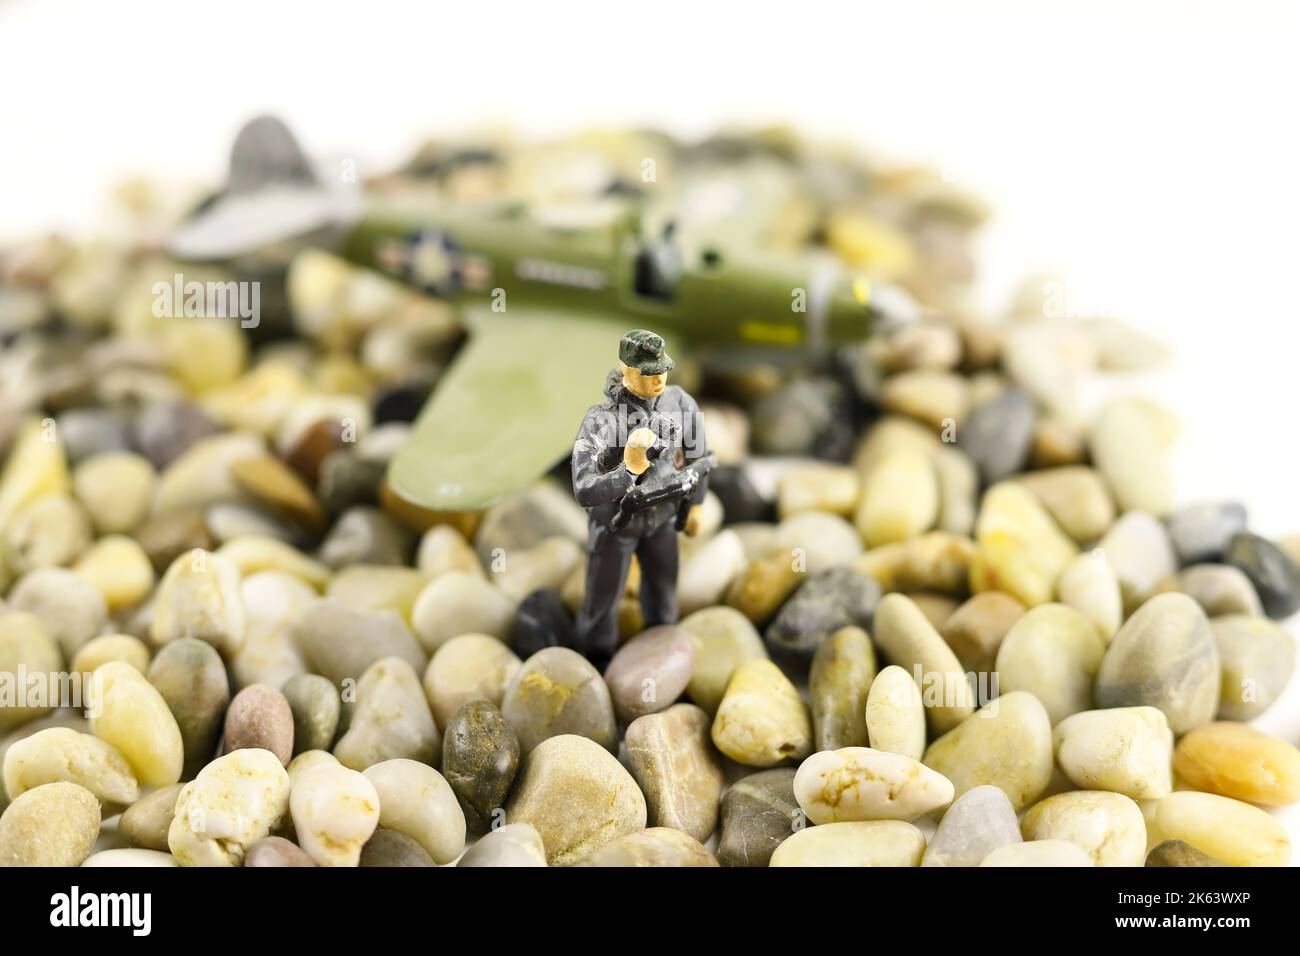 Toy figure of soldier on stones on blurred airplane background. Military war concept. Stock Photo